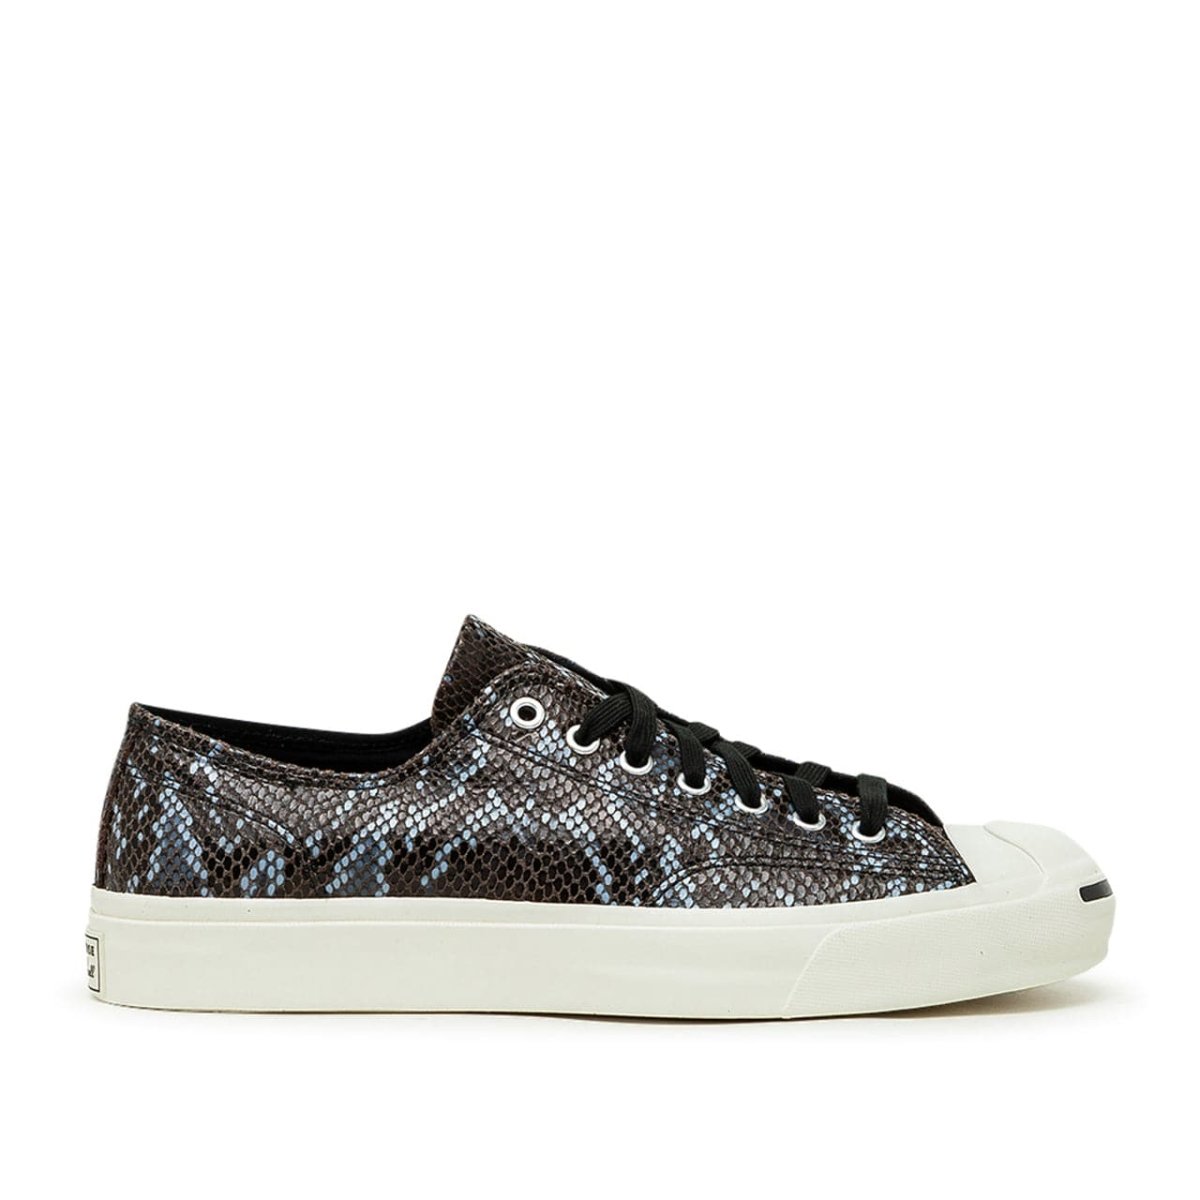 Image of Converse Jack Purcell OX Archive Reptile Low (Black / Blue)